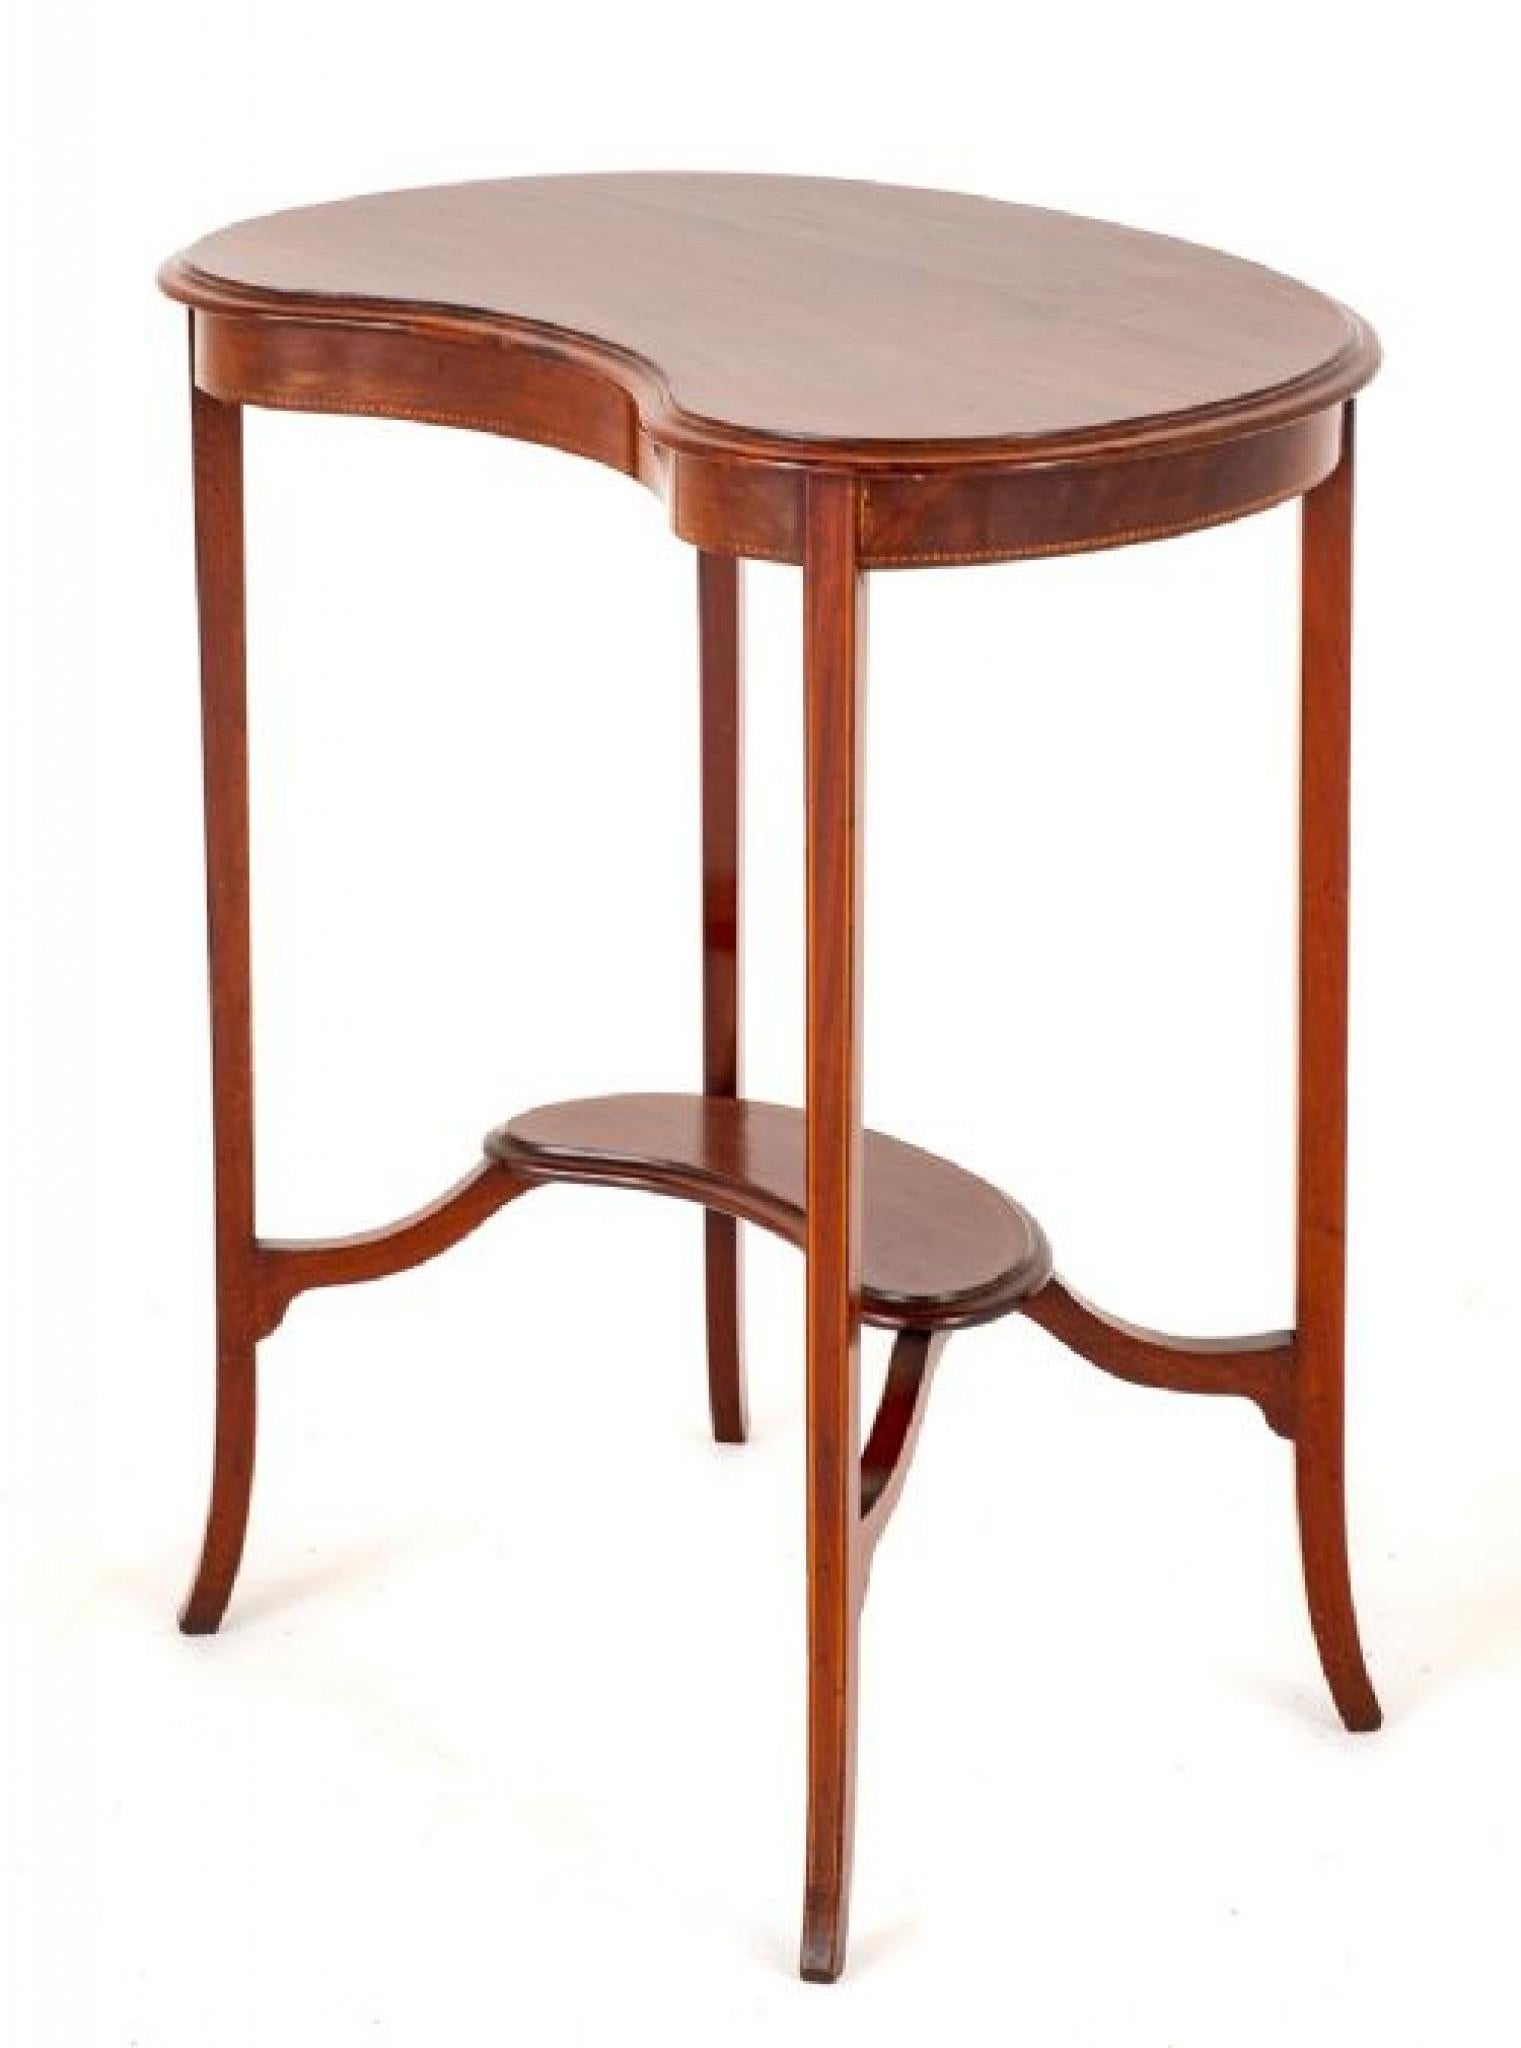 Early 20th Century Sheraton Revival Side Table Kidney Bean Form